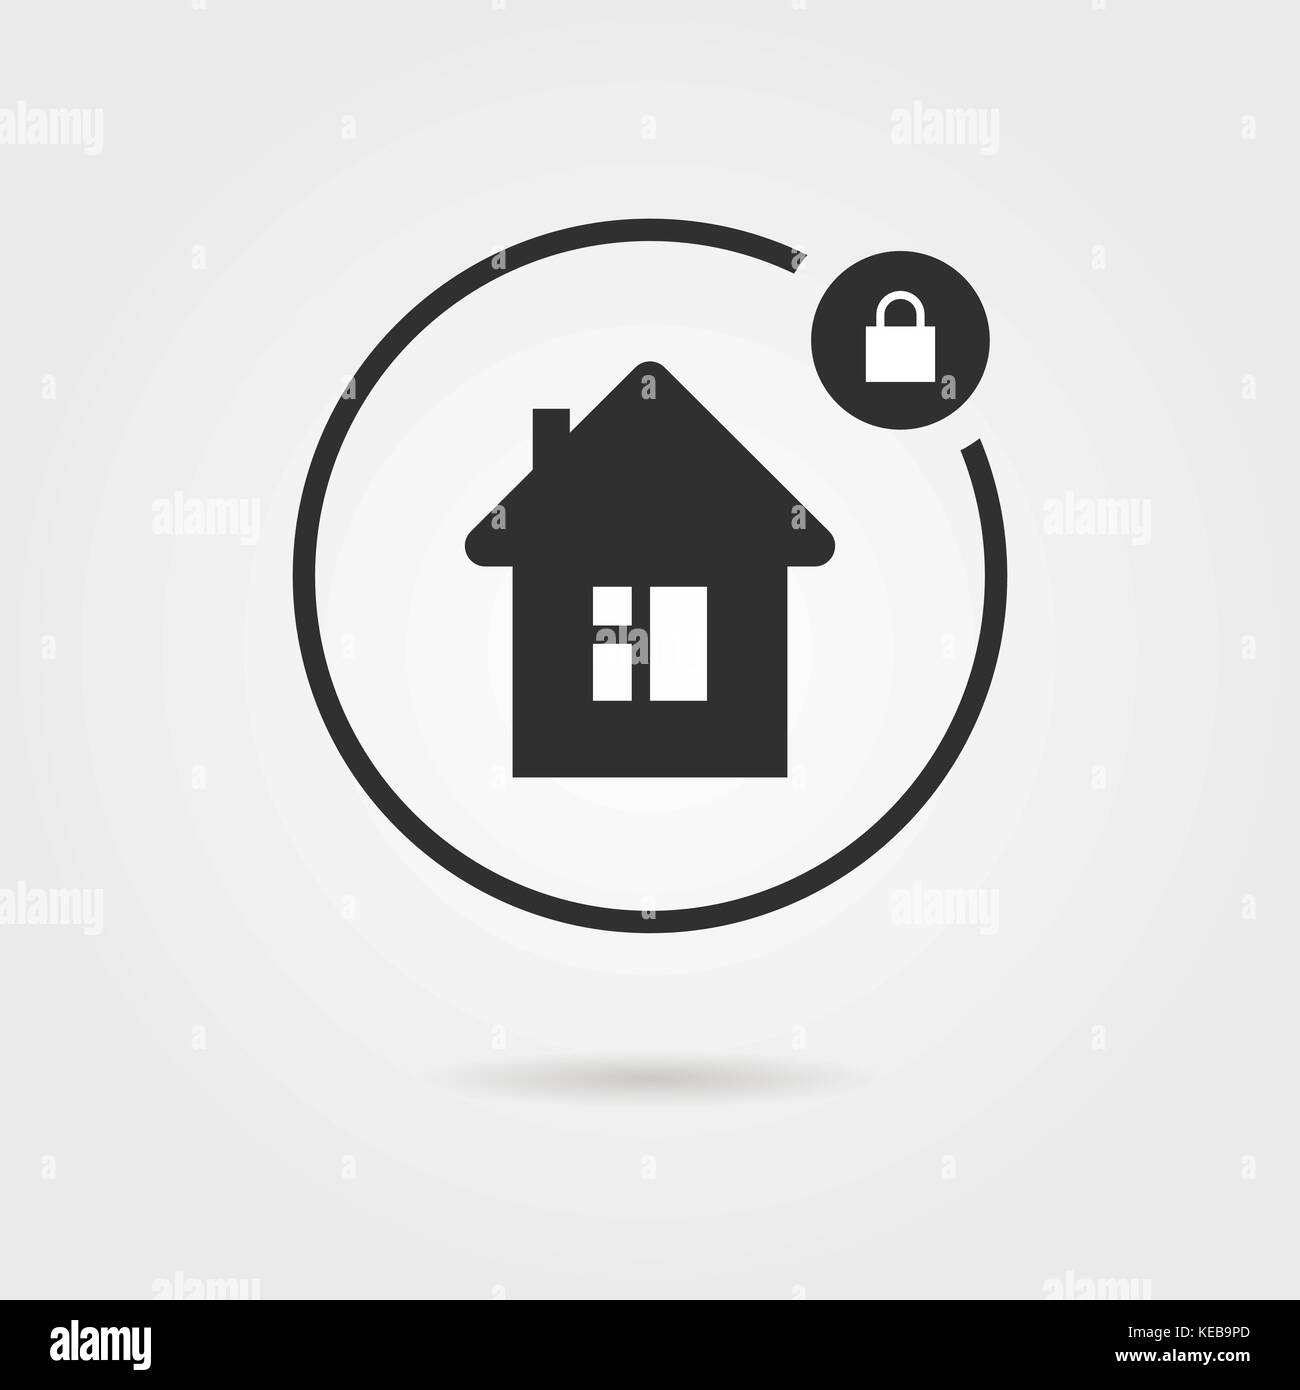 black locked house icon with shadow Stock Vector